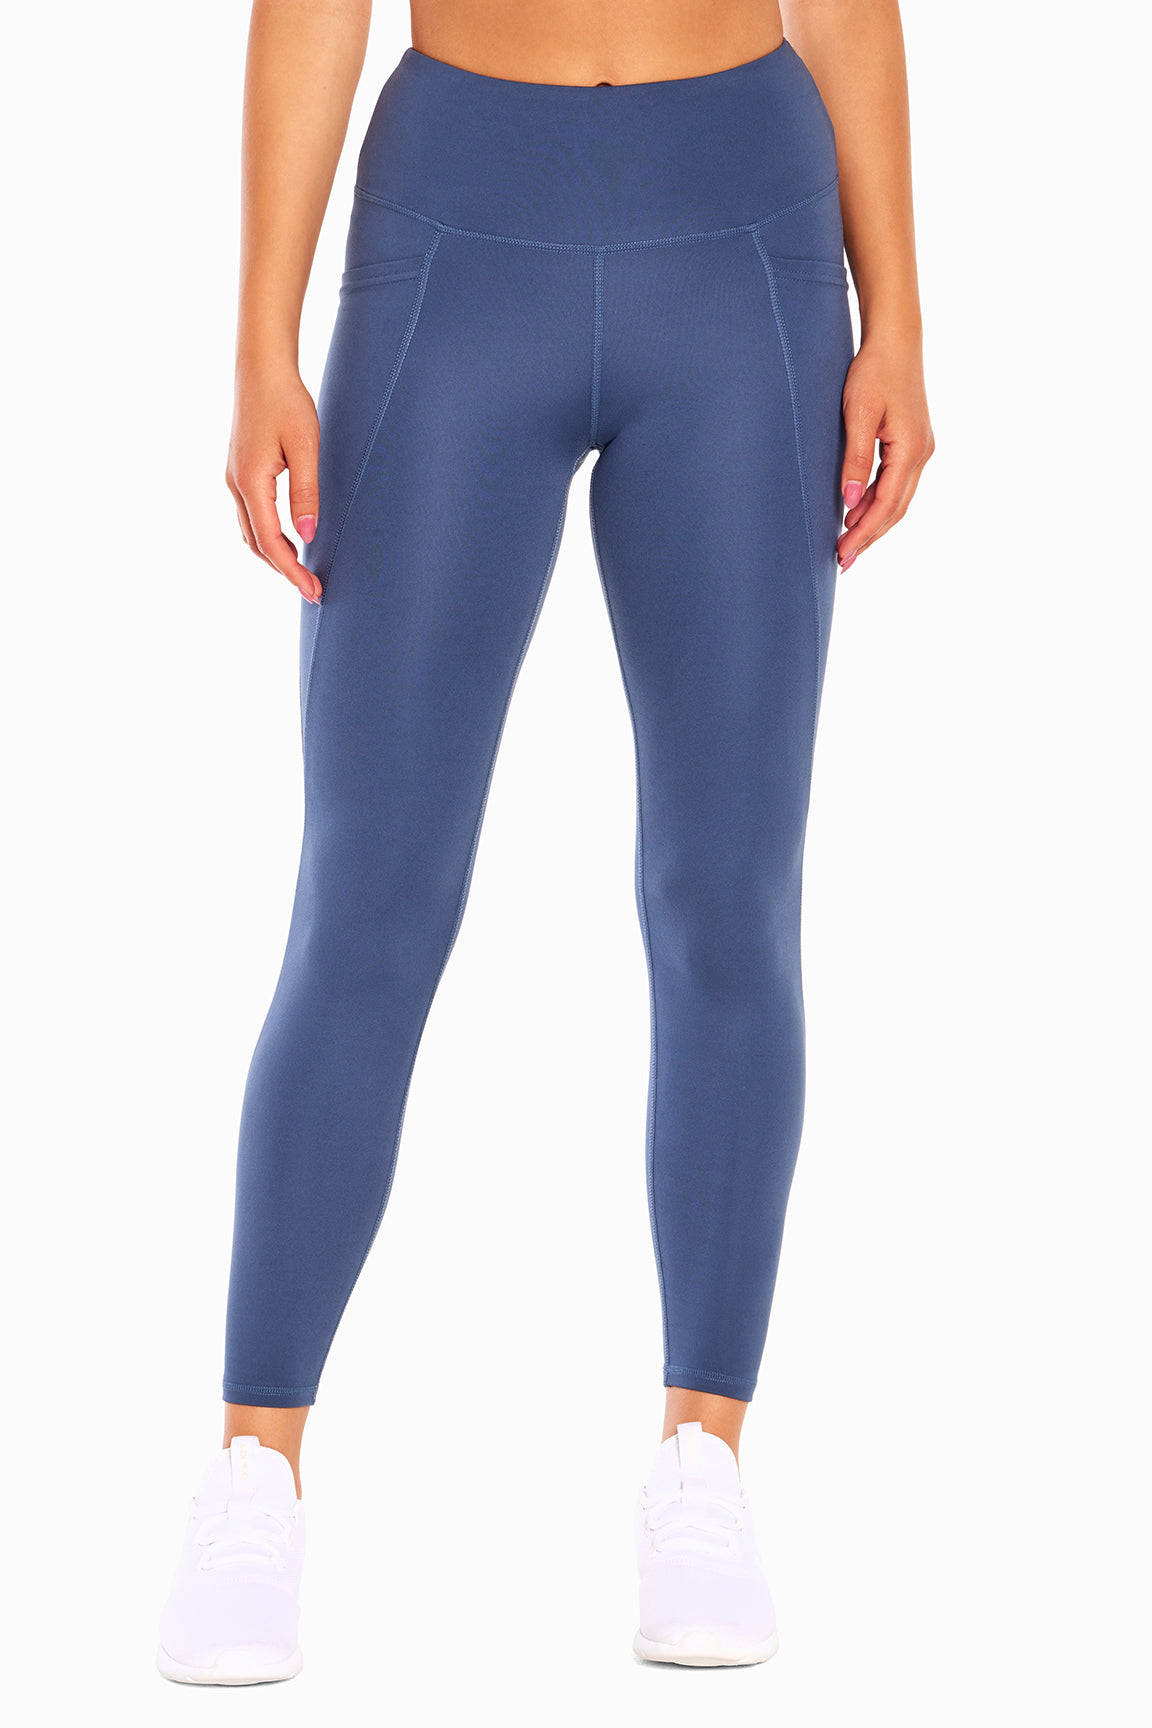 Terry Legging (Partly Cloudy)